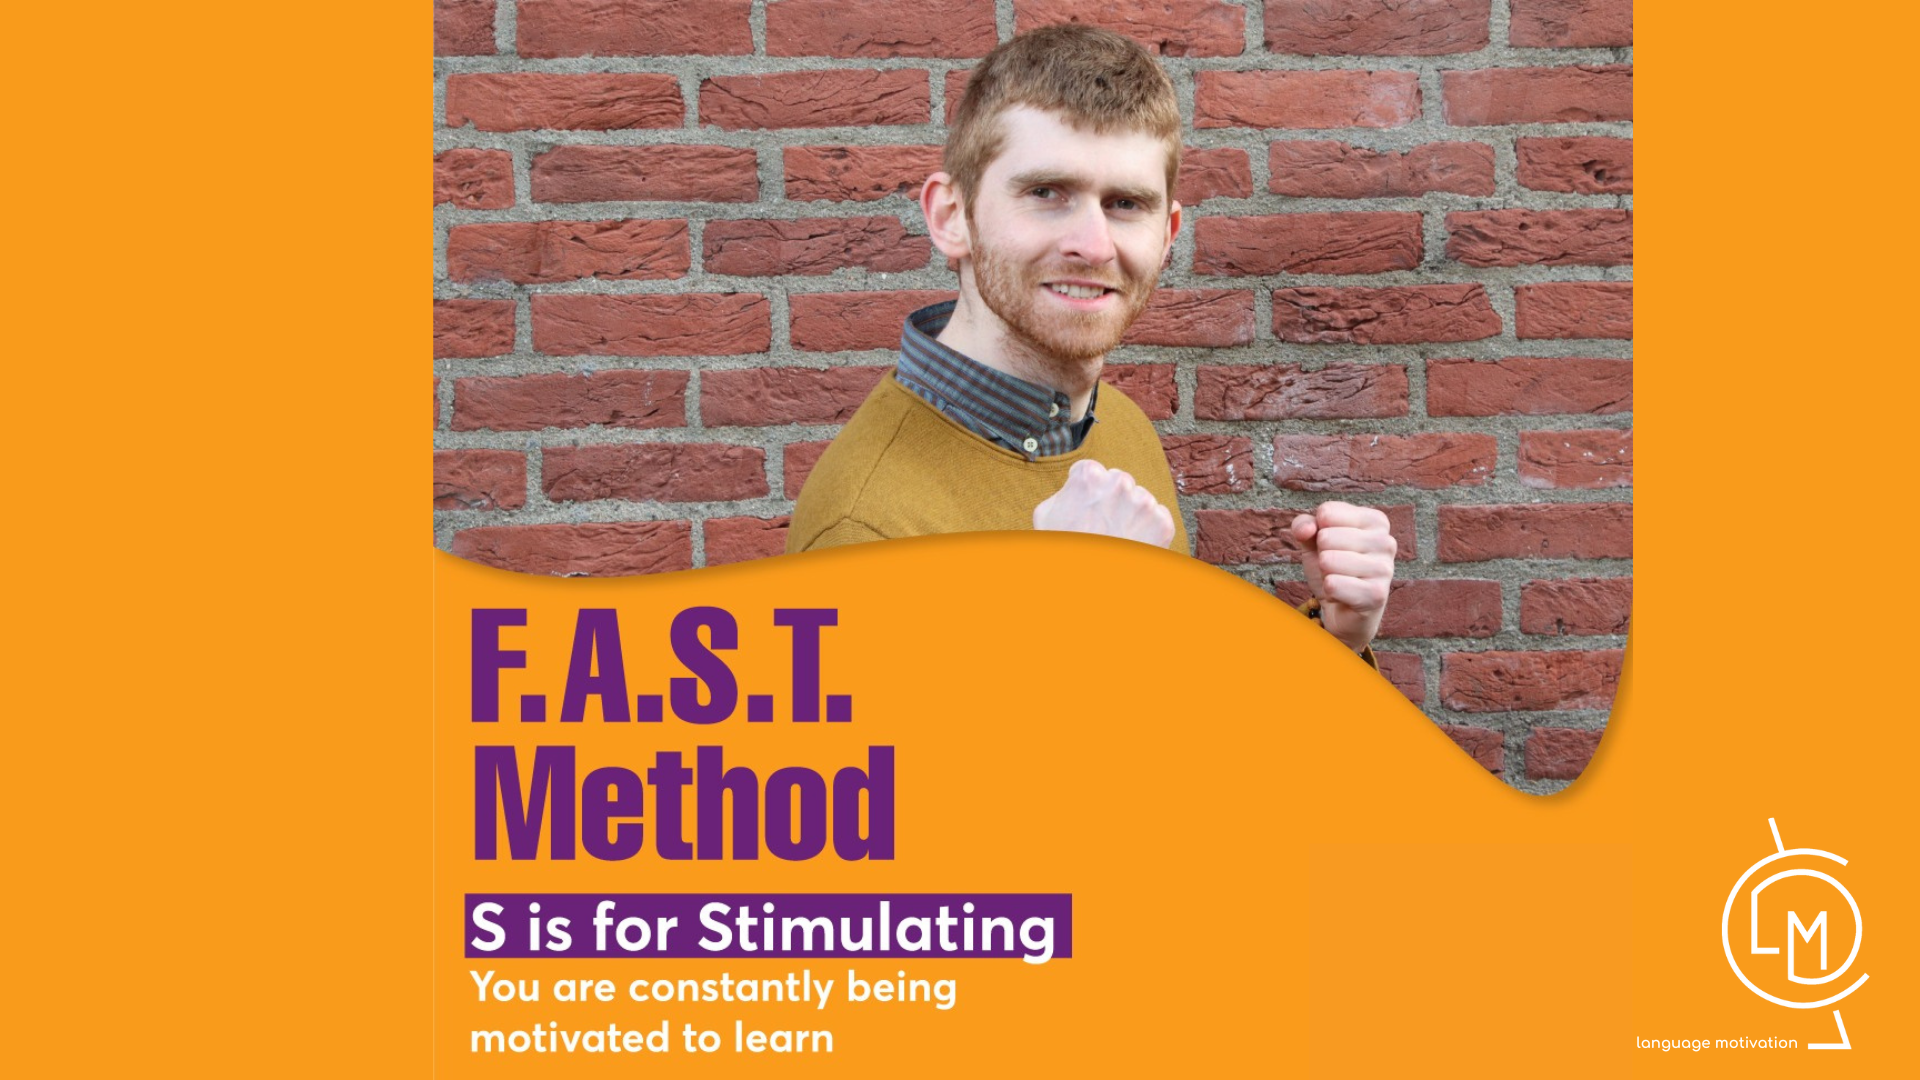 The F.A.S.T. method is Stimulating